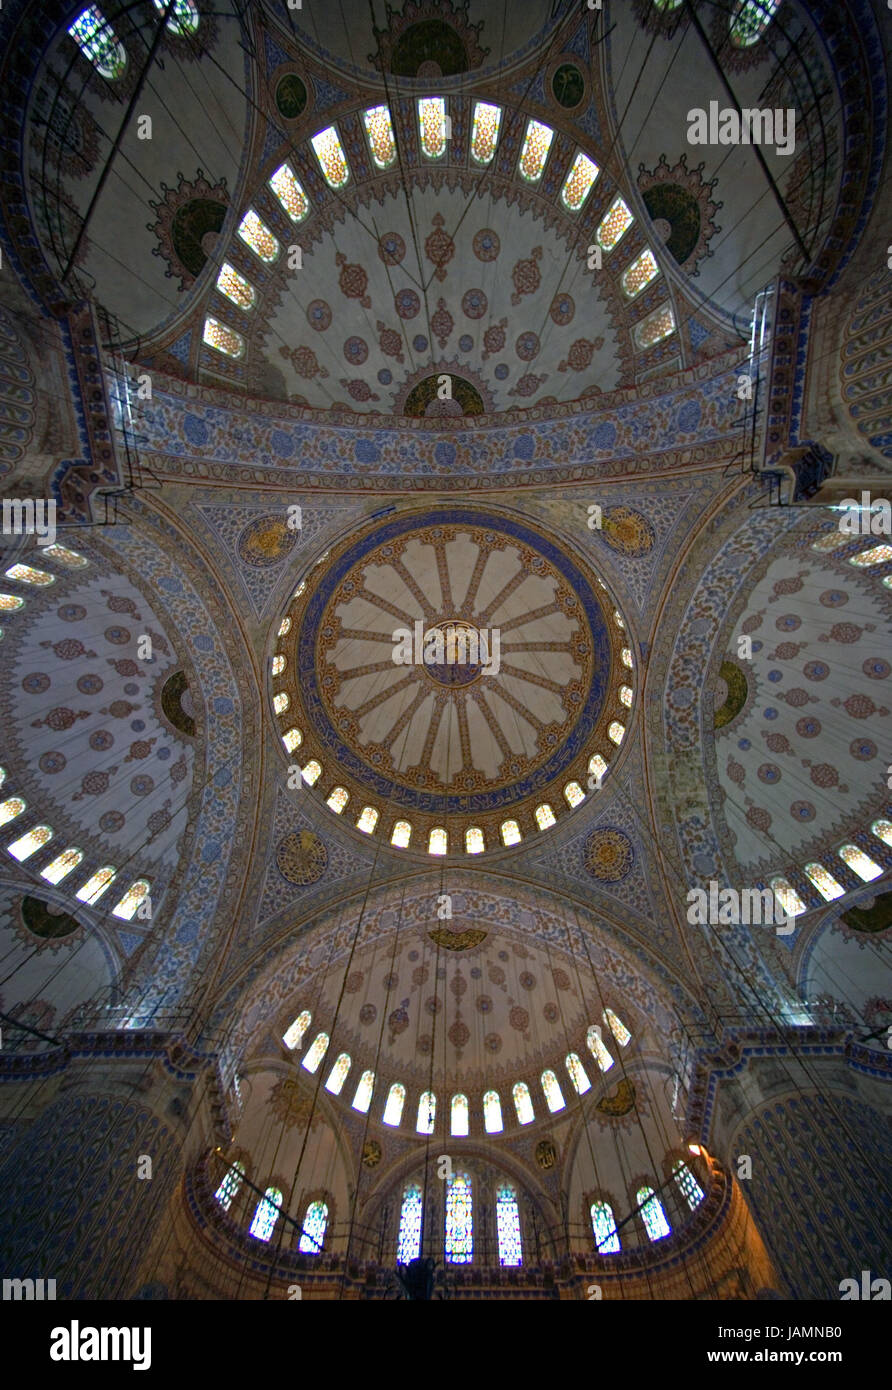 Turkey,Istanbul,sultan Ahmet Camii,'blue mosque',dome,interior shot,perspective,town,city,metropolis,port,culture,faith,religion,Islam,structure,historically,architecture,church,sacred construction,Sultan-Ahmet-Camii,sultan's Ahmed's mosque,mosque,domed building,landmark,place of interest,inside,architecture,visitor,curves,grace note,ornaments,tiles,deserted, Stock Photo